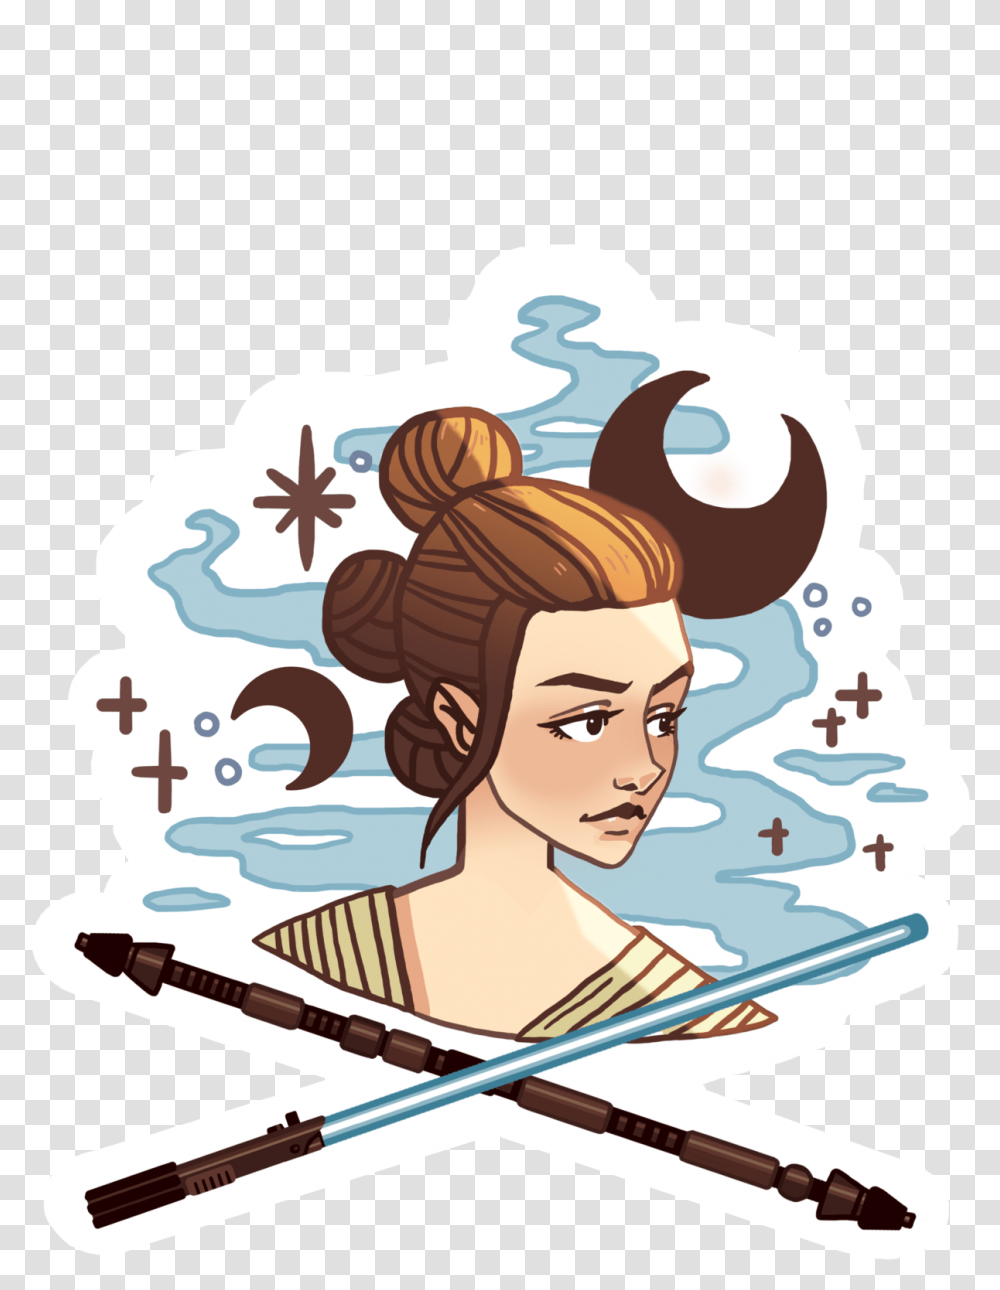 May The Force Be With You Clipart Rey Star Wars Cartoon, Drawing, Doodle, Outdoors Transparent Png